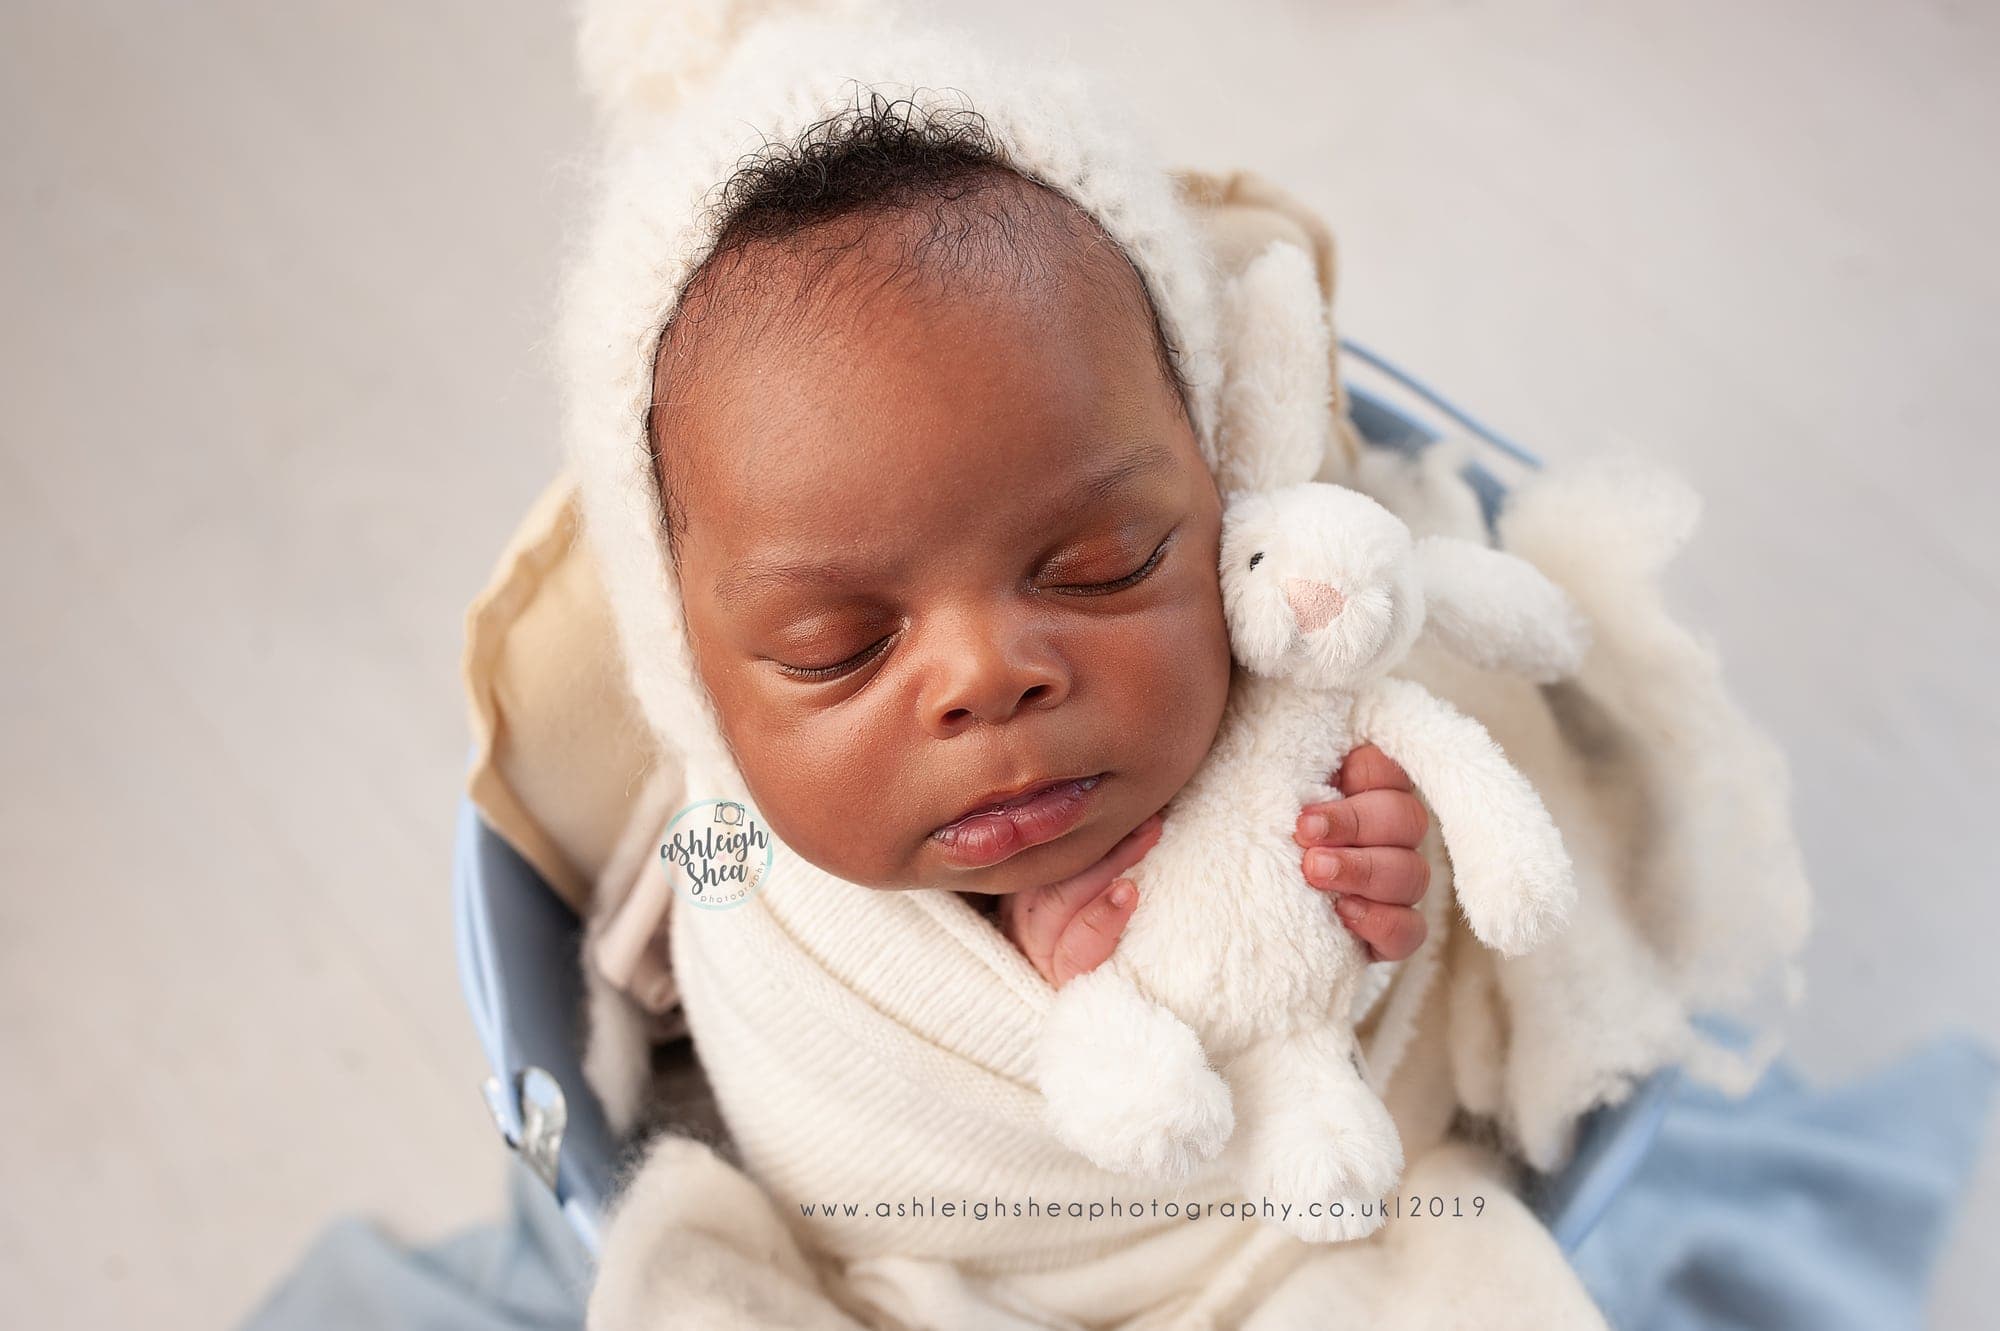 When should you book your baby's newborn photography session?